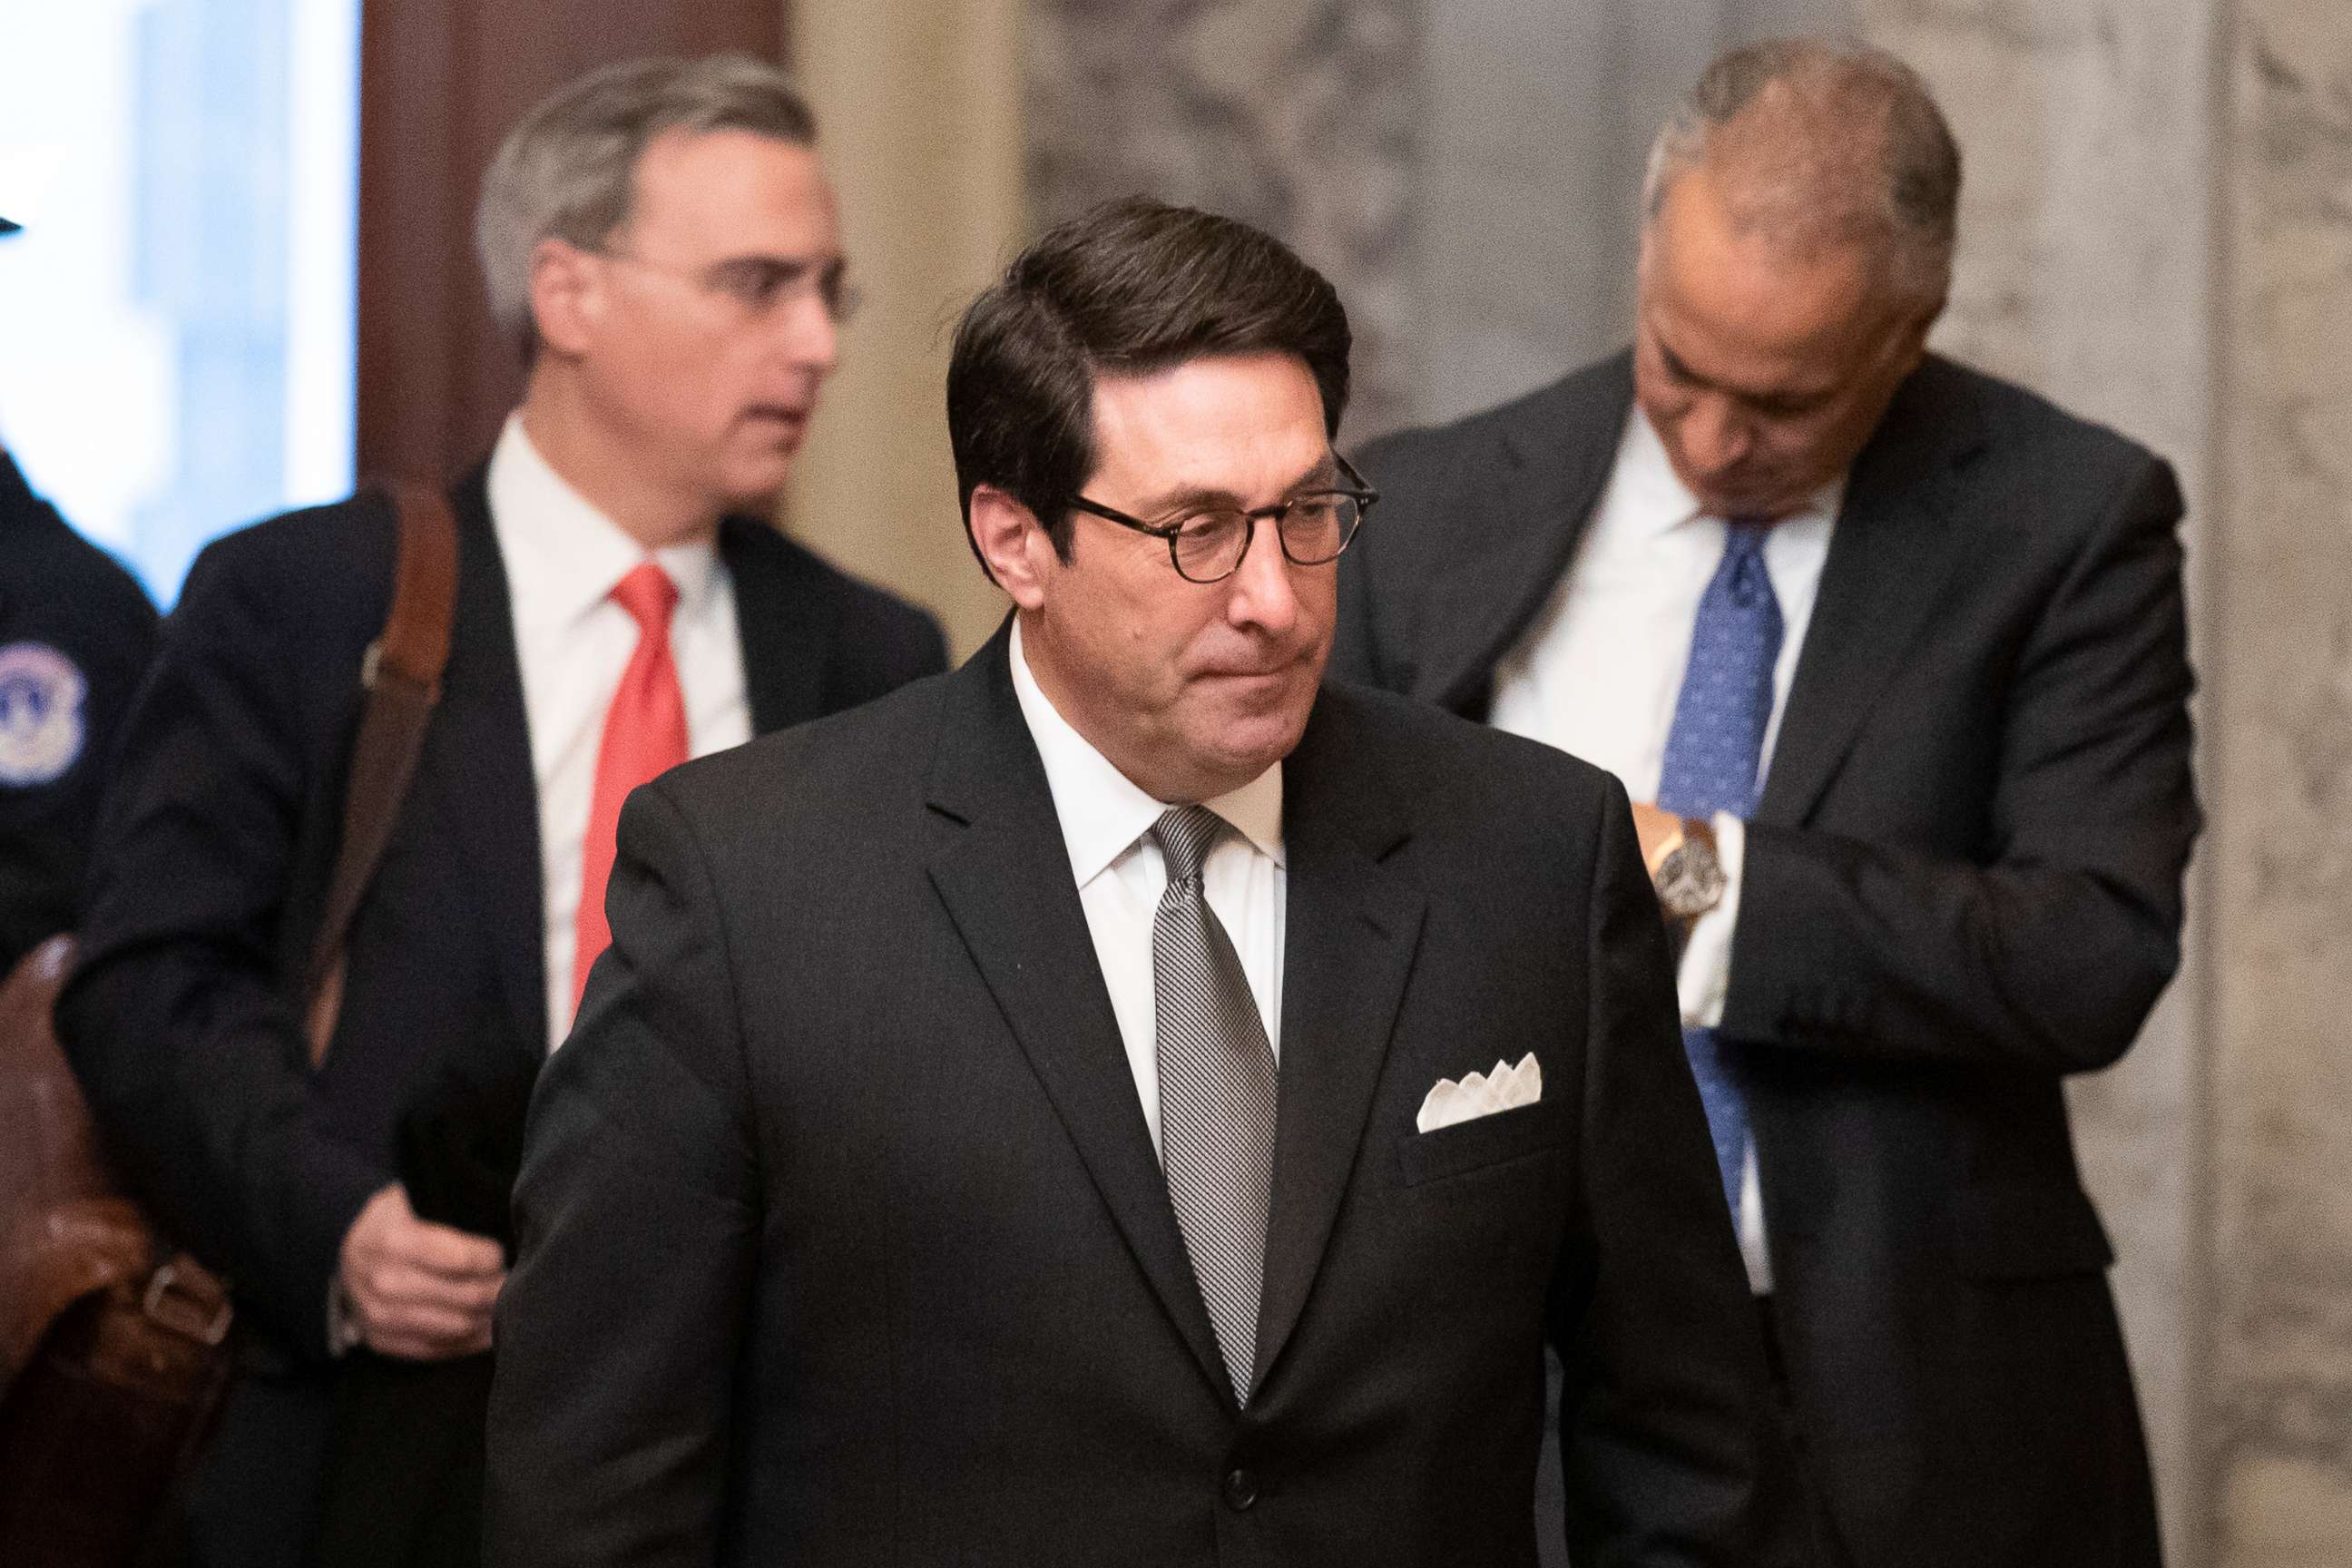 PHOTO: Personal attorney to President Donald Trump, Jay Sekulow, center, and White House counsel Pat Cipollone, left arrive on Capitol Hill, Feb. 3, 2020.